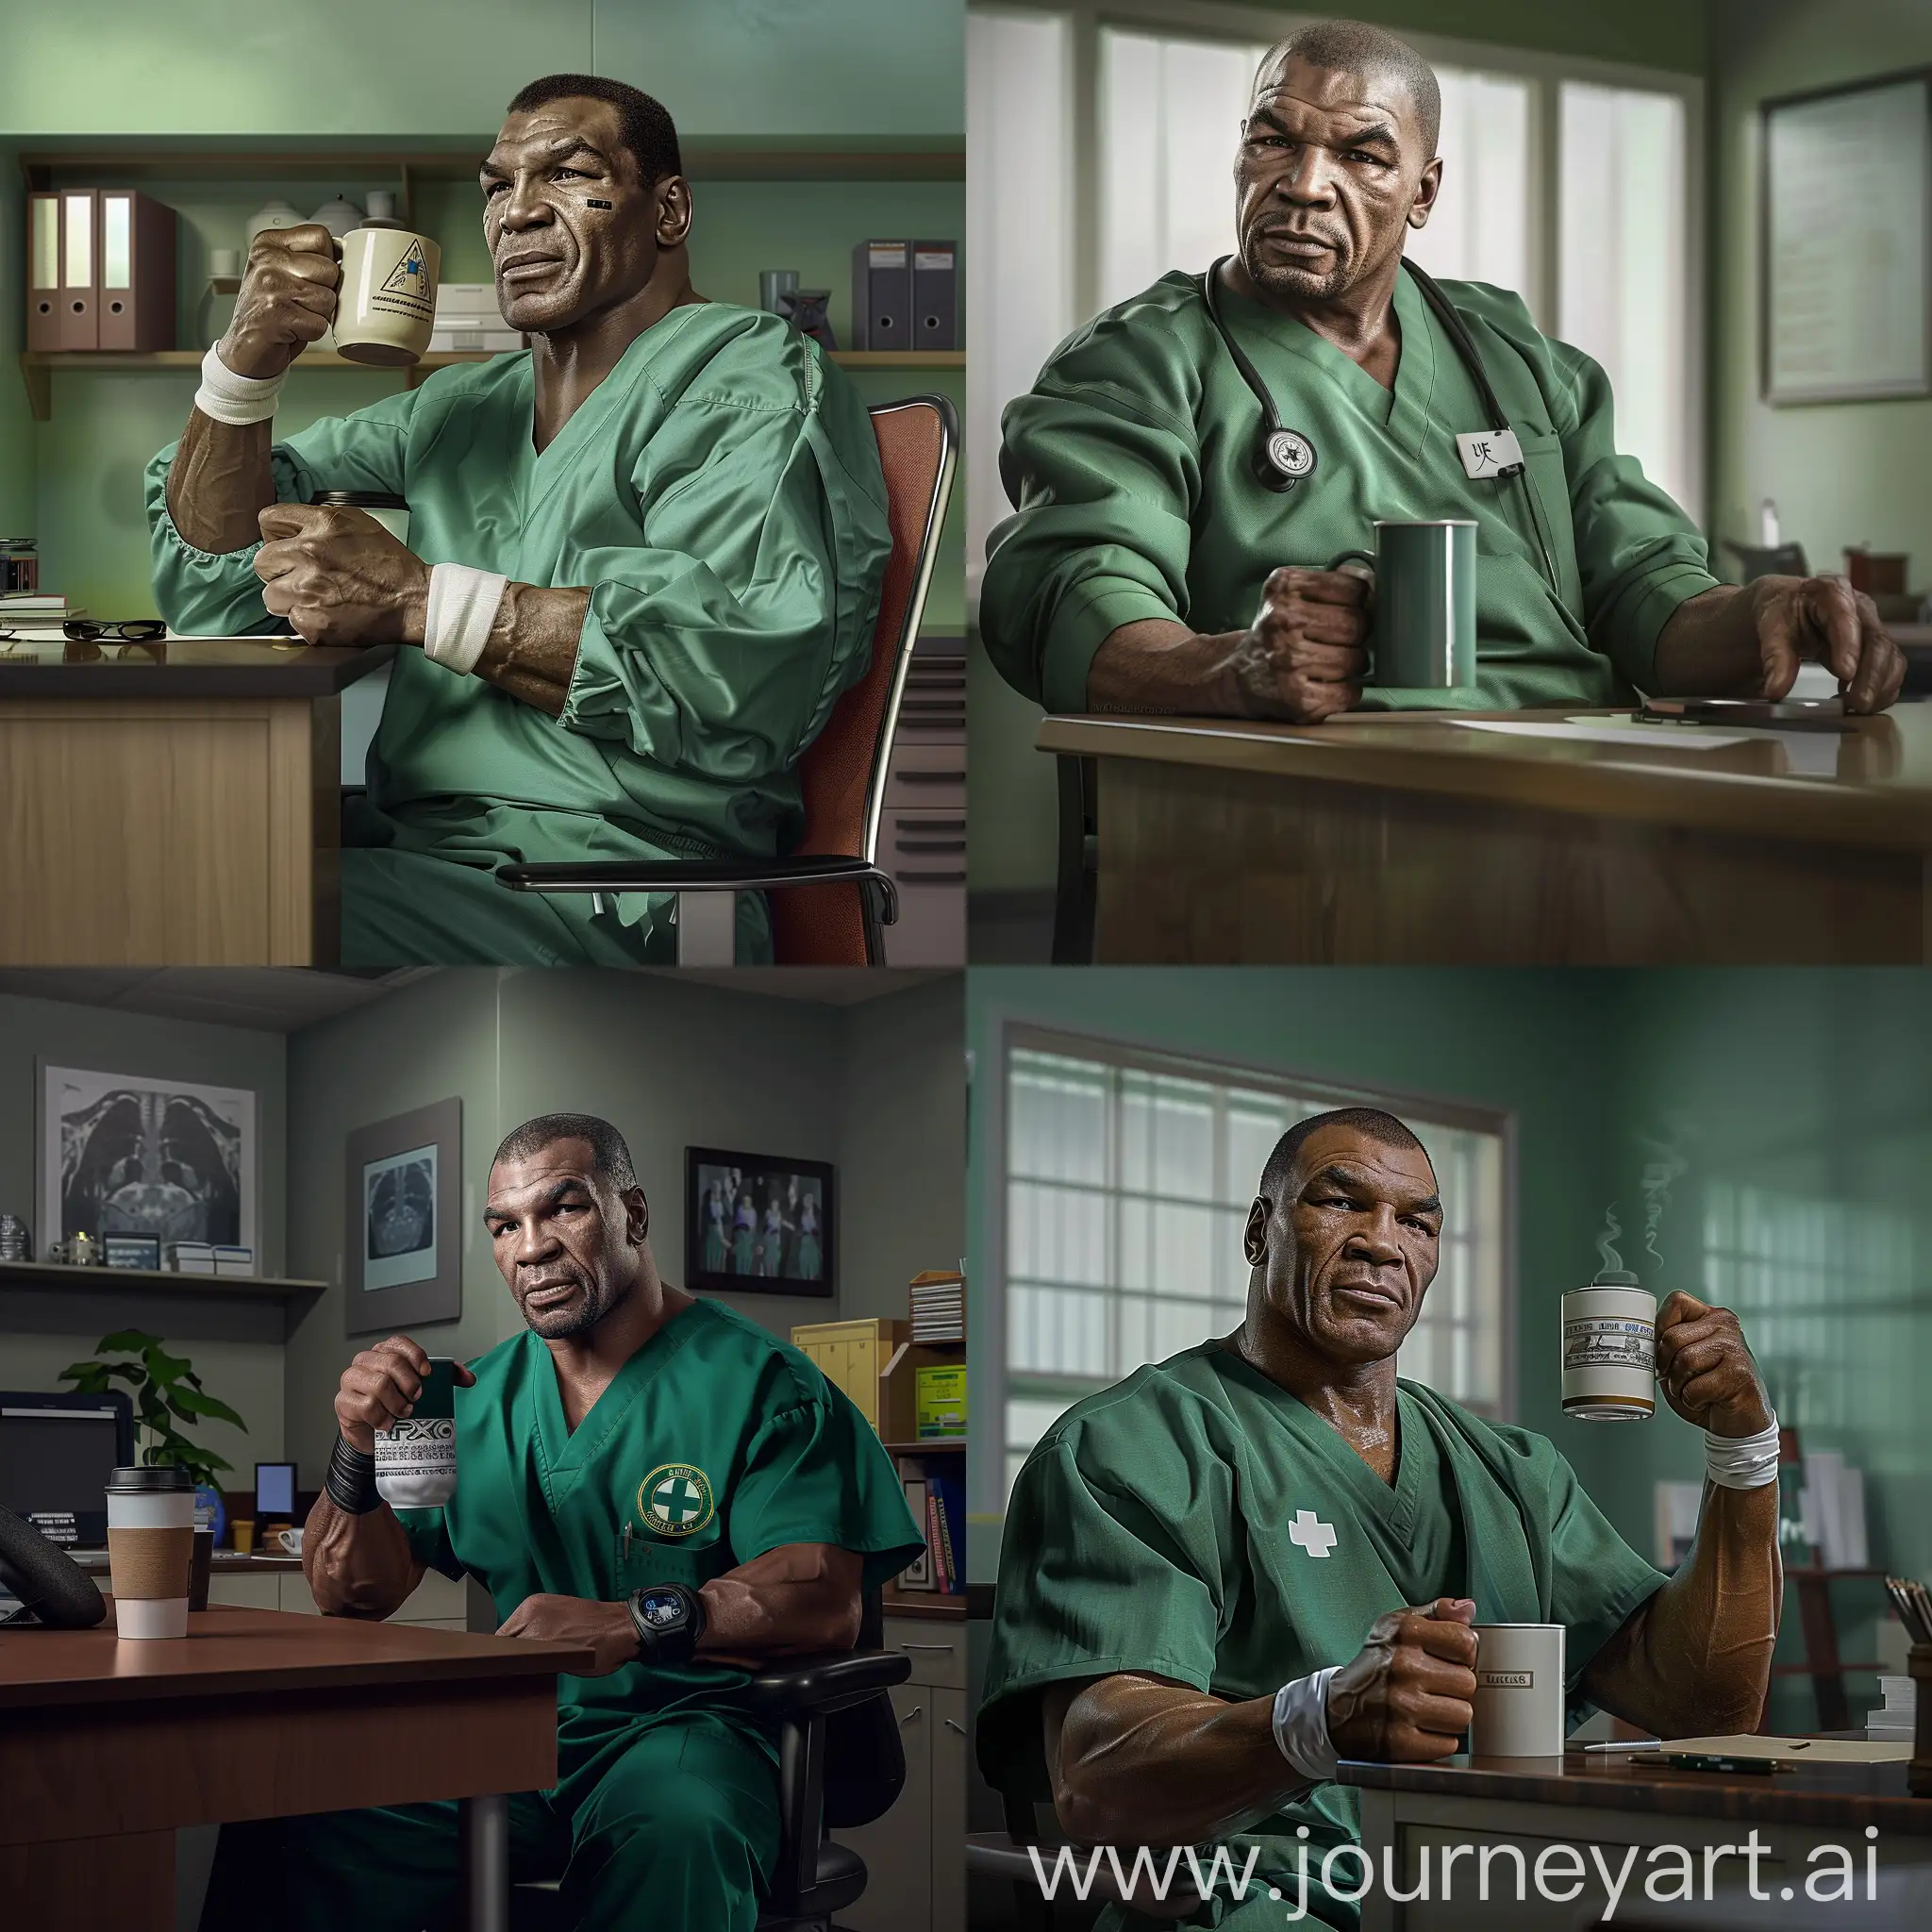 Mike-Tyson-in-Green-Medical-Uniform-Drinking-Coffee-at-Office-Desk